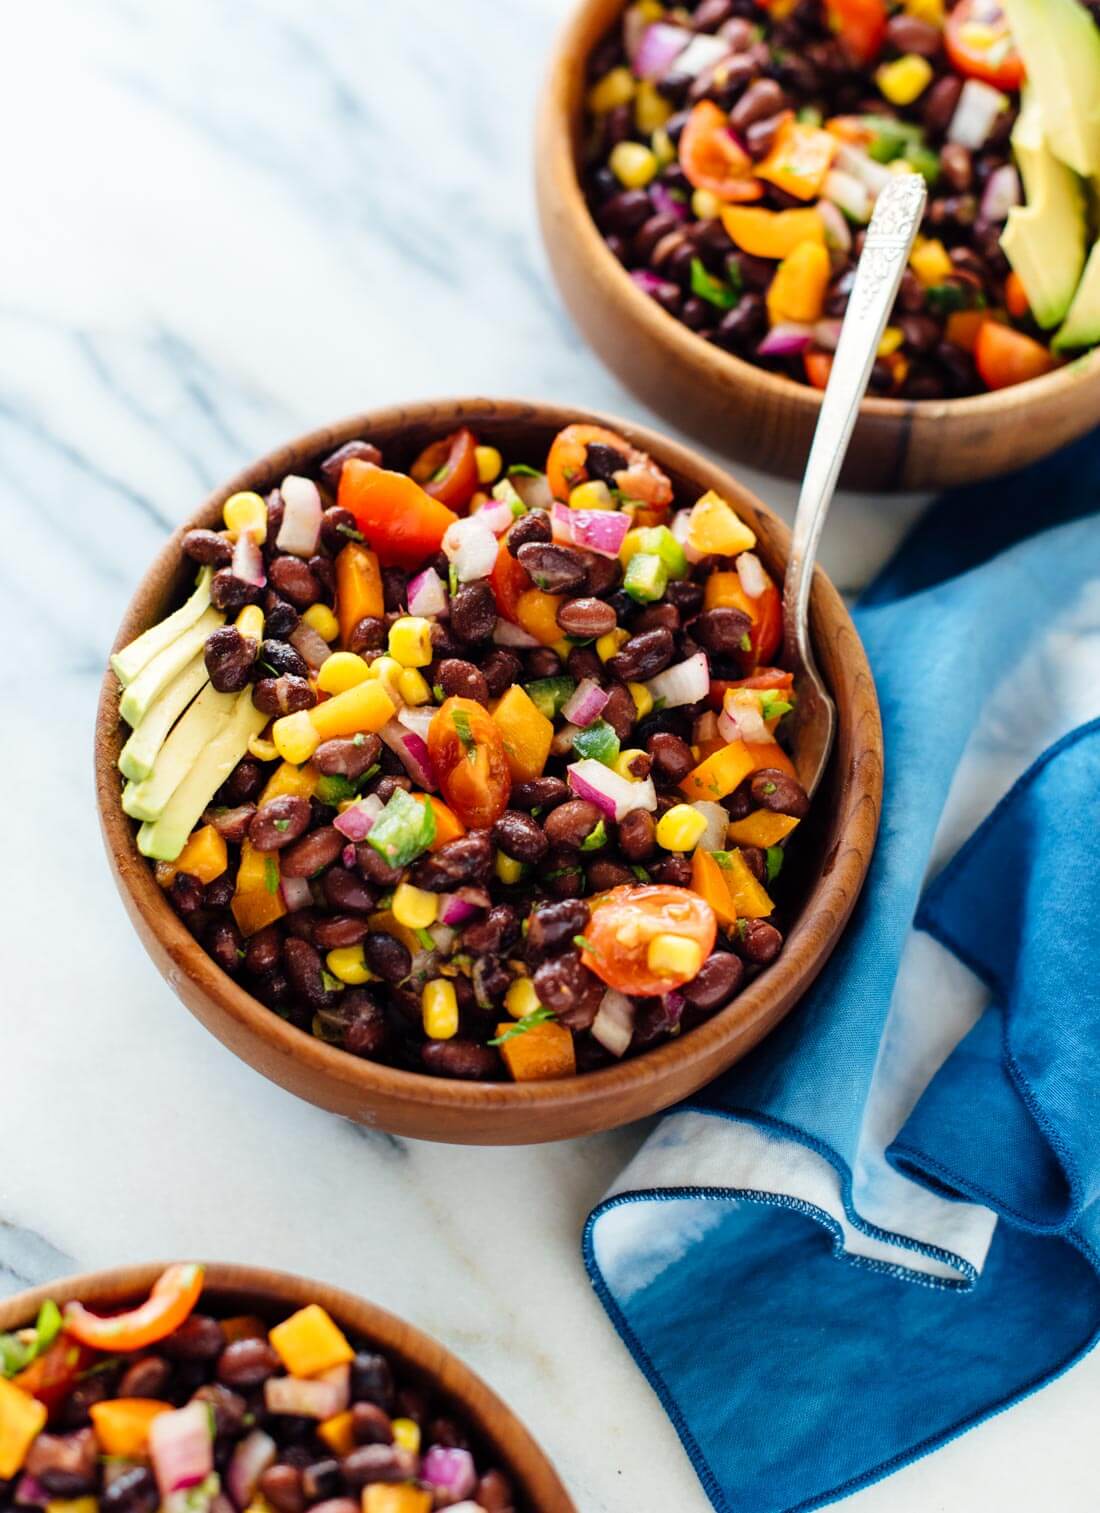 Enjoy this Southwestern black bean salad recipe all week long! It's colorful and bursting with nutrients. cookieandkate.com